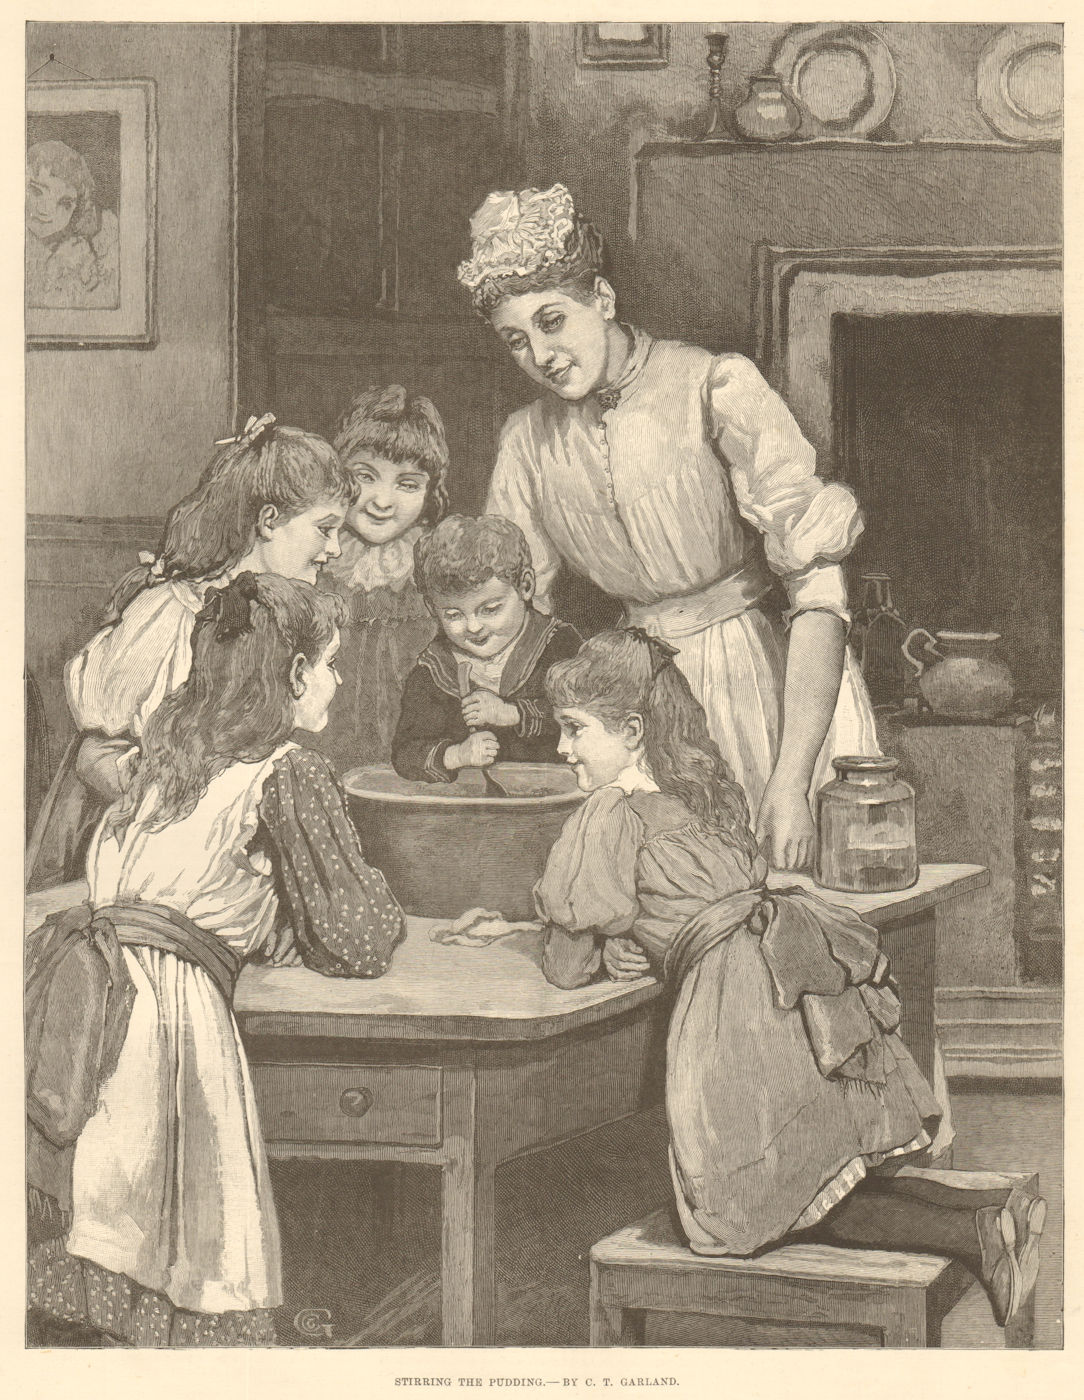 Stirring the pudding, by C. T. Garland. Family. Hospitality 1892 old print